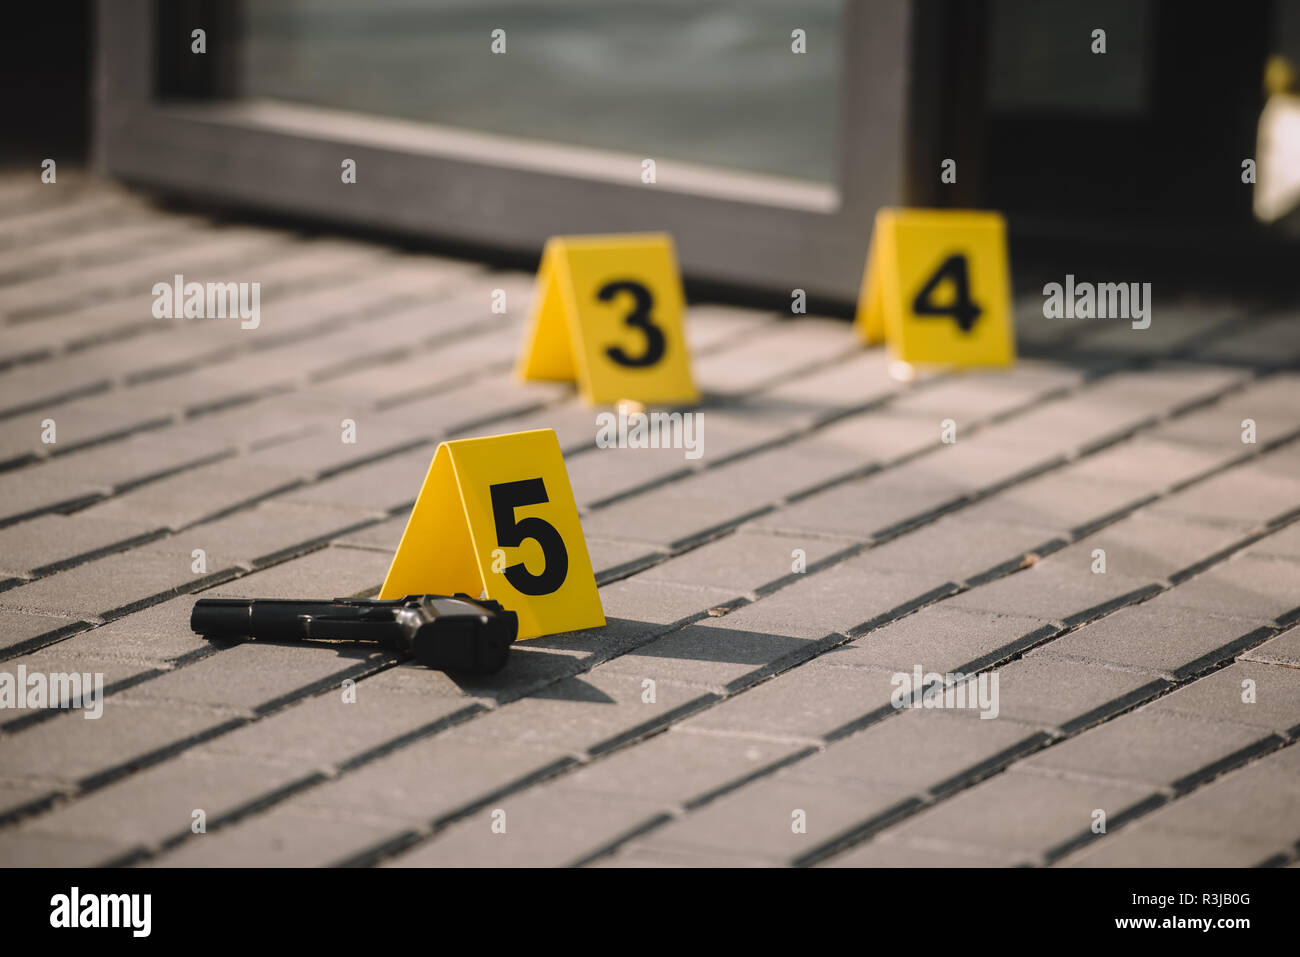 Close Up View Of Crime Scene With Gun And Numbers Stock Photo Alamy